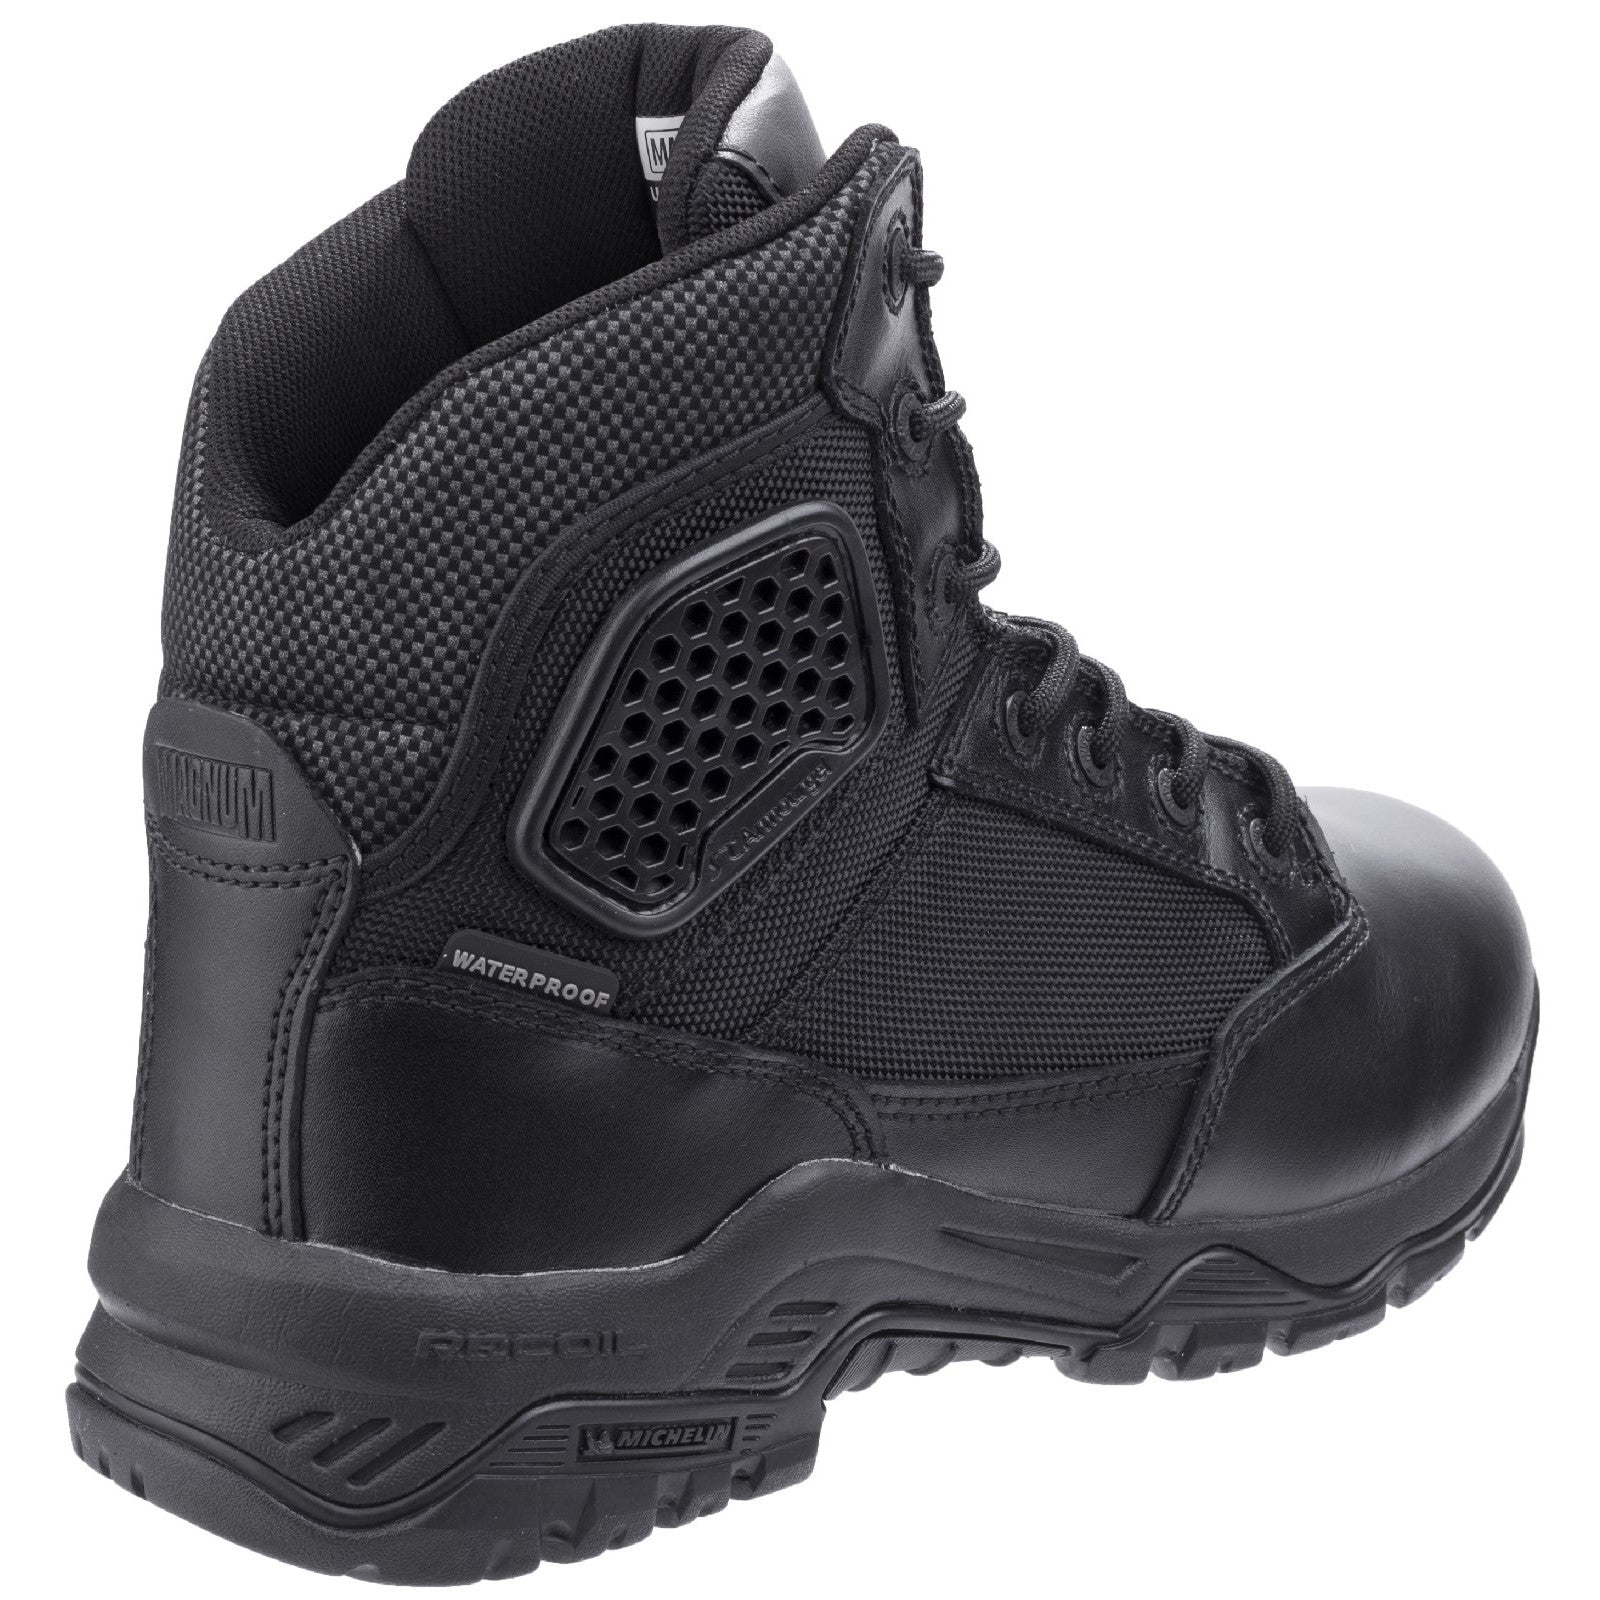 Magnum Strike Force 6.0 black waterproof combat service non-safety boot #M801393 